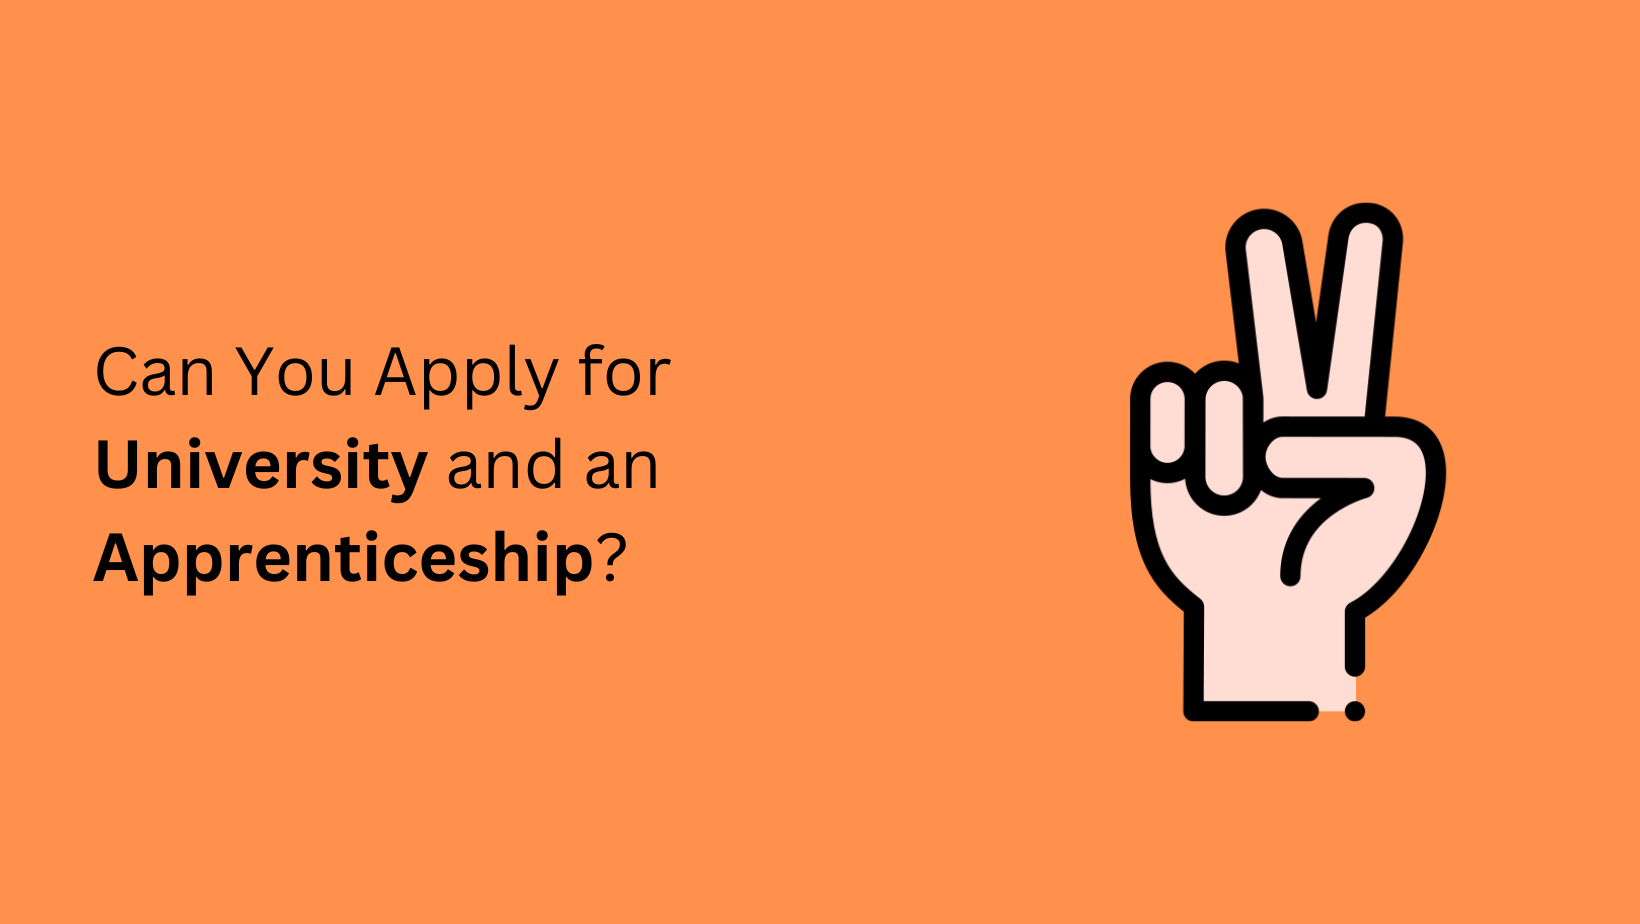 Apprenticeships are an excellent way to gain practical skills and knowledge while earning a wage. However, you may wonder, "Can you apply for university and an apprenticeship?"